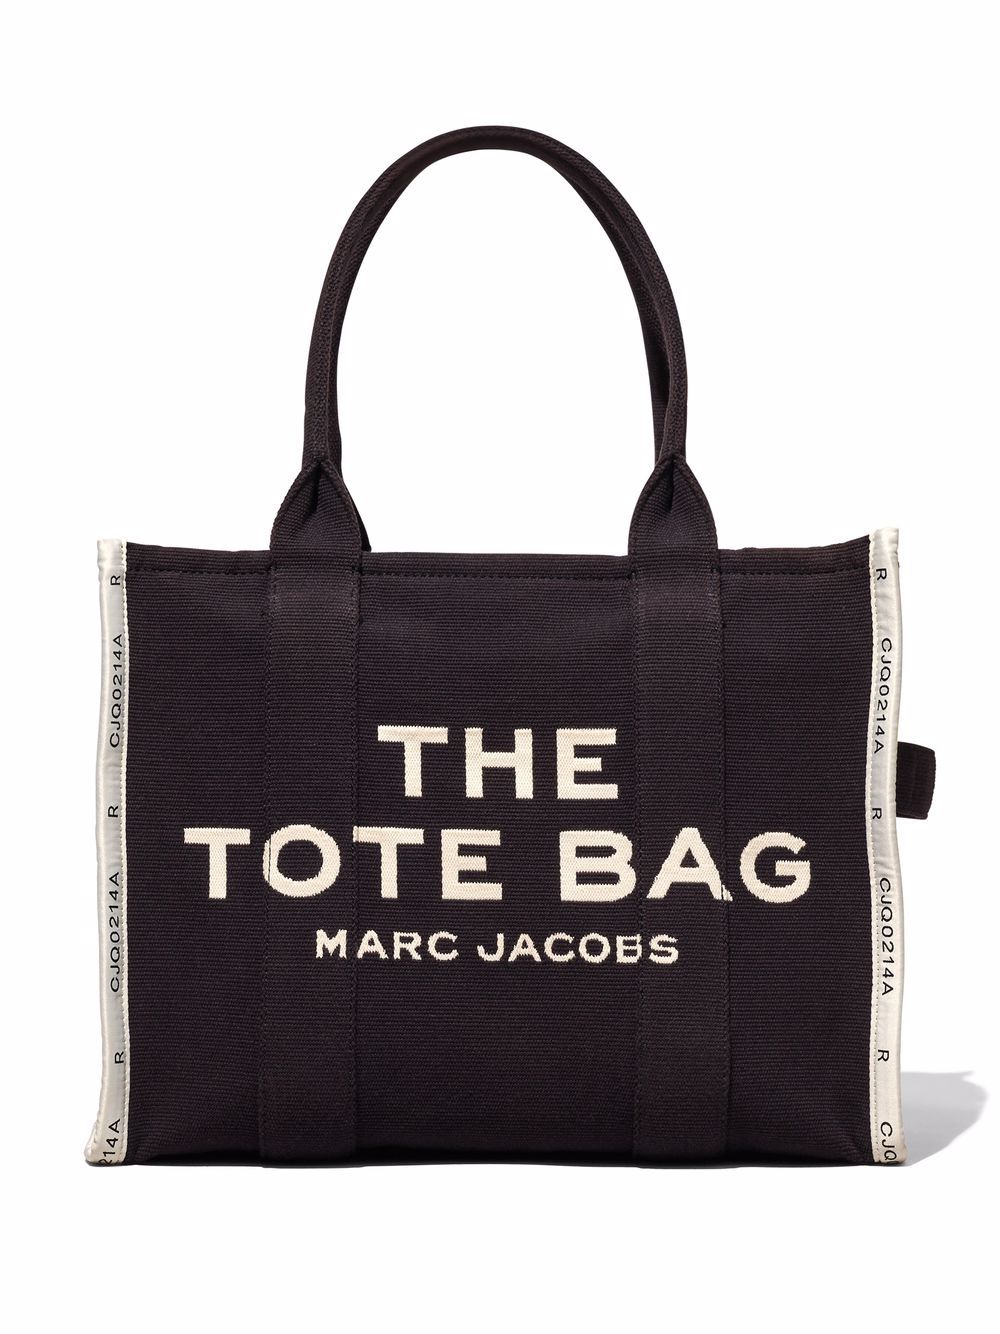 MARC JACOBS TOTE LARGE